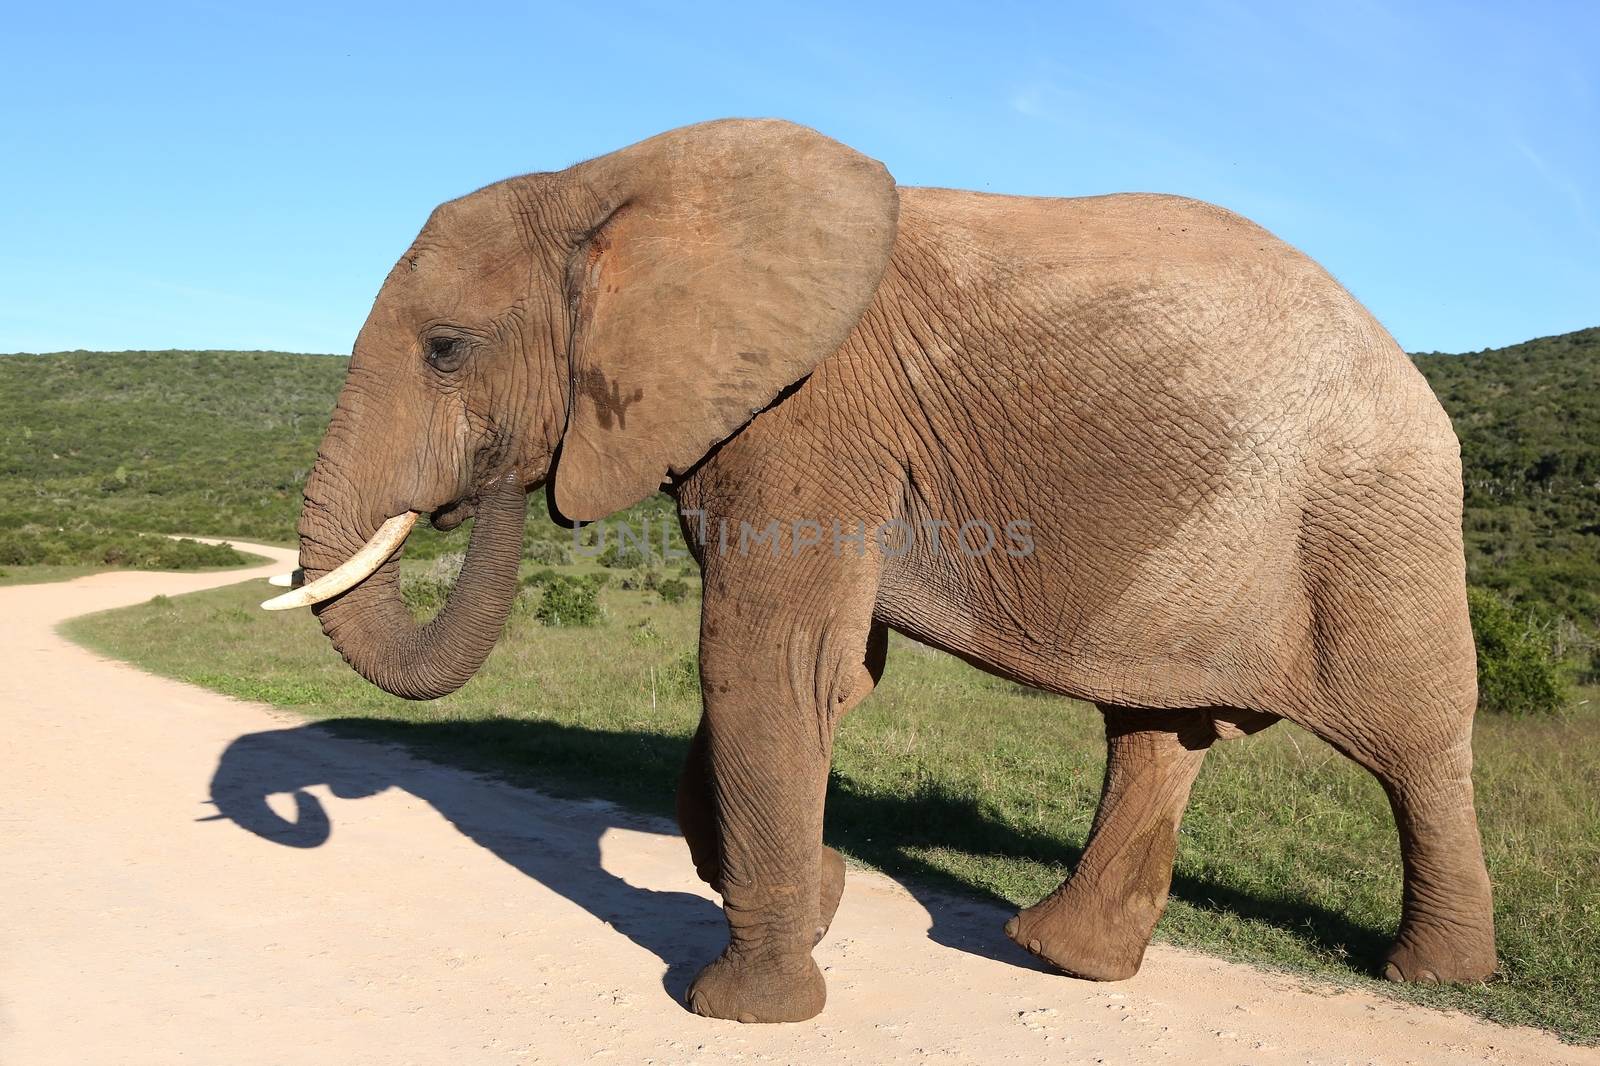 Large male elephant with wrinkly skin and white tusks